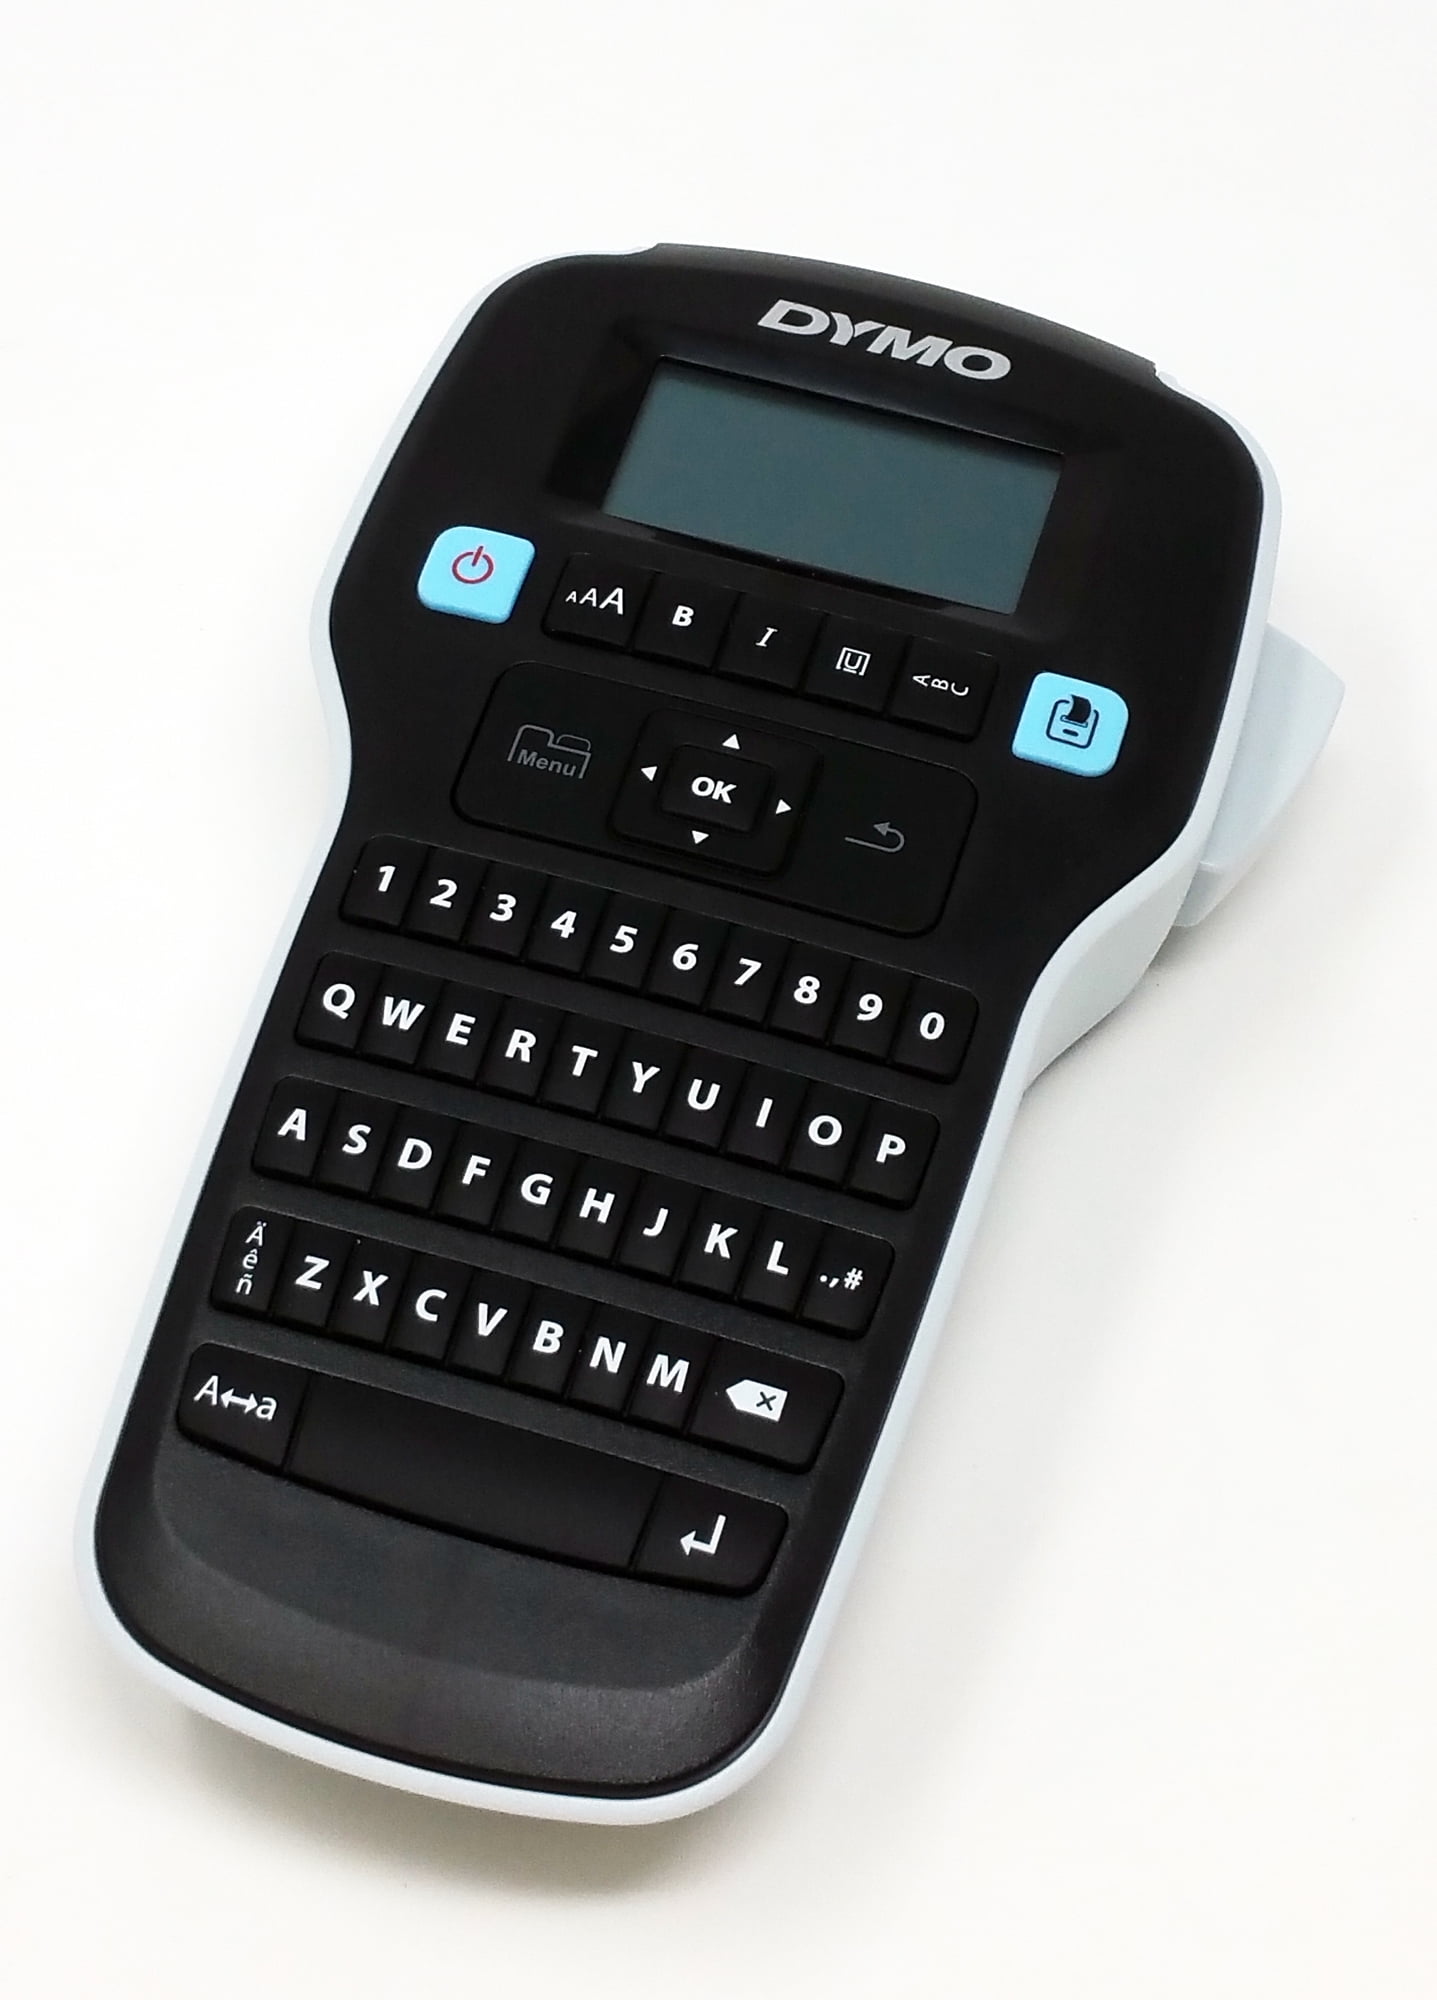 DYMO Label Maker with 2 D1 DYMO Label Tapes | LabelManager 160 Portable  Label Maker, QWERTY Keyboard, One-Touch Smart Keys, Easy-to-Use, for Home 